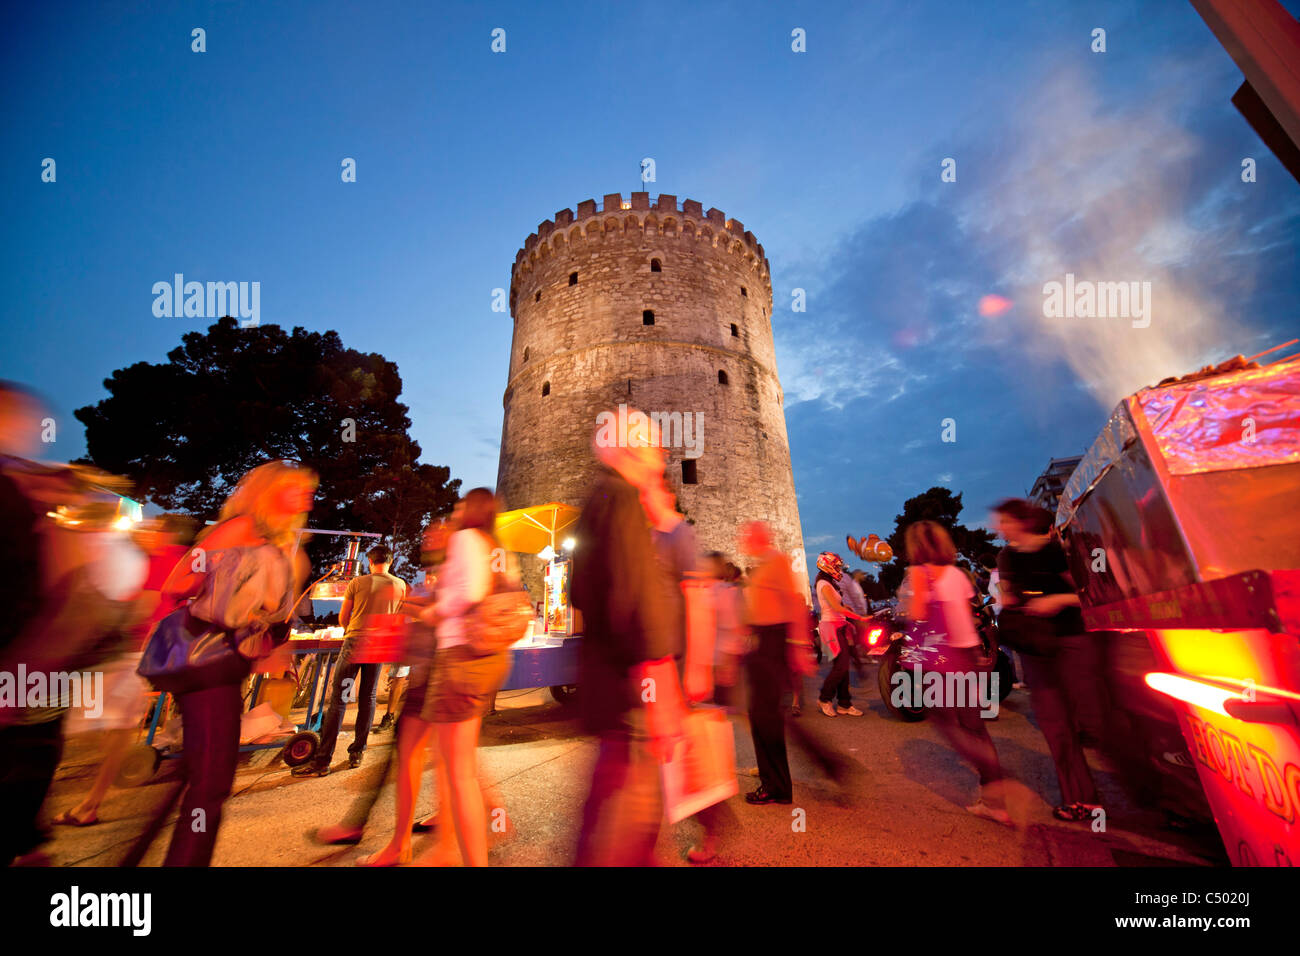 a busy evening at the illuminated white tower, symbol of the town of Thessaloniki, Macedonia, Greece Stock Photo